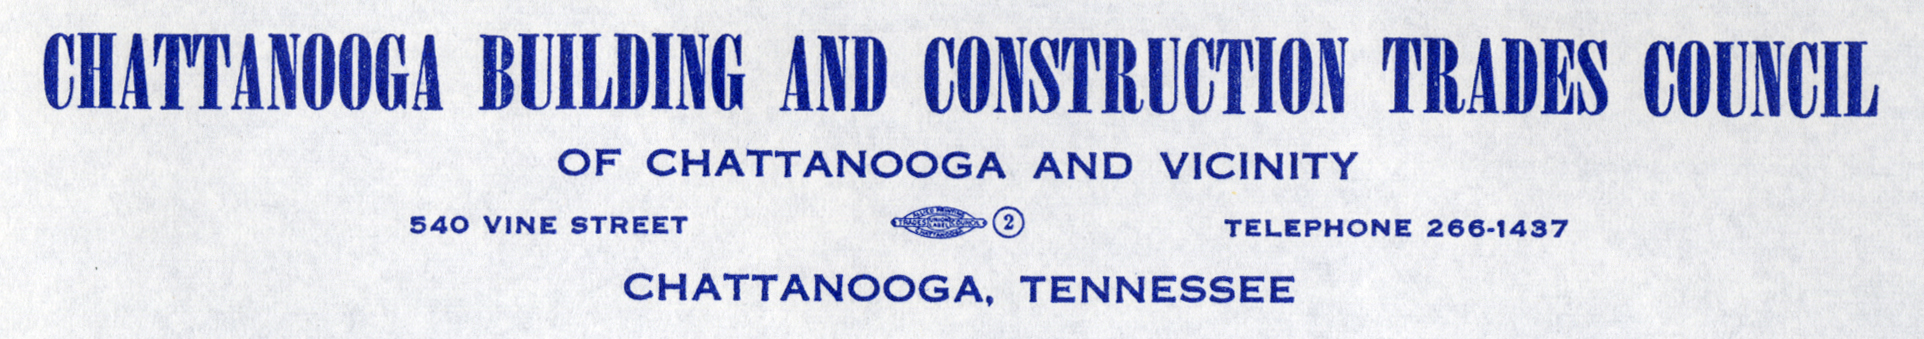 Chattanooga Build and Construction Trades Council